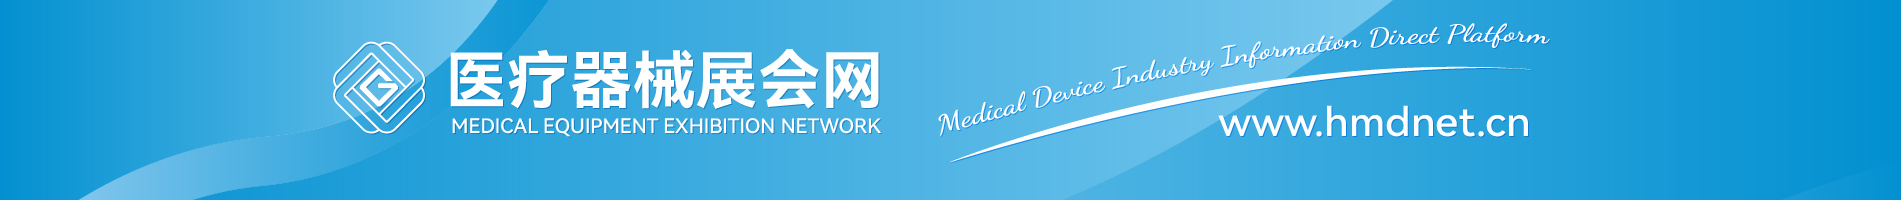 Medical Device Exhibition Network